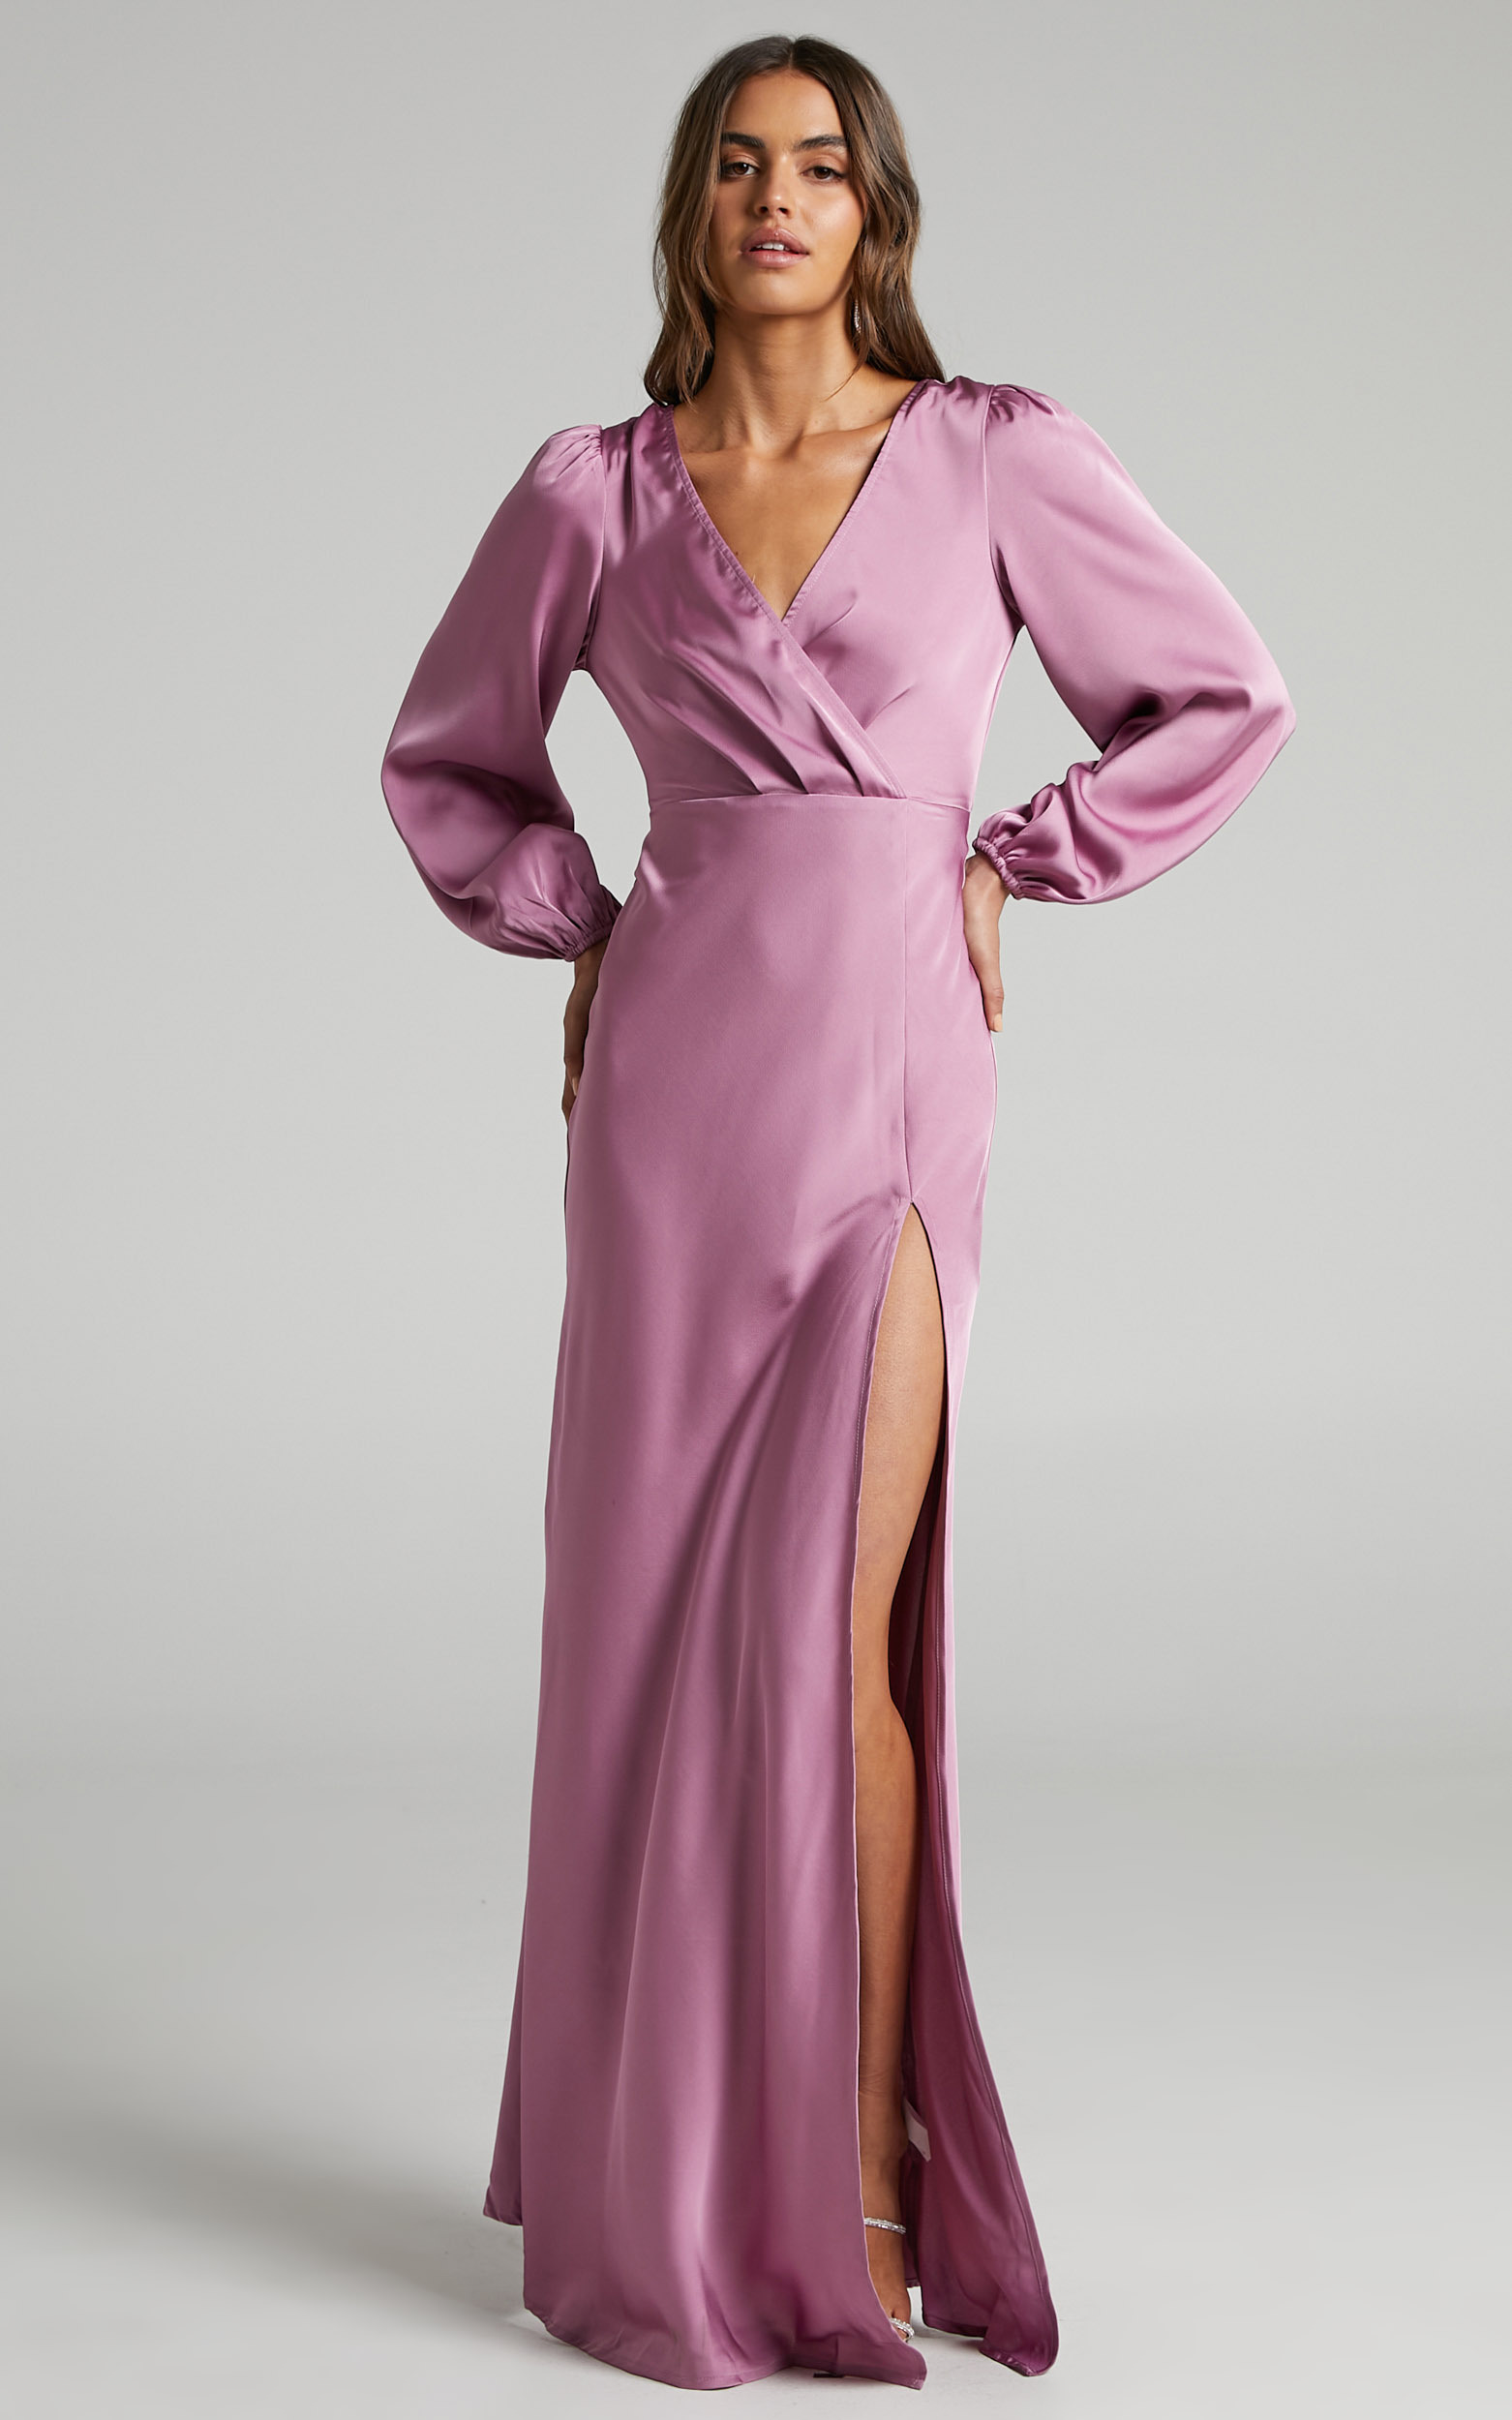 Wellah Maxi Dress - Balloon Sleeve Thigh Split V Neck Satin Dress in Orchid - 04, PNK1, hi-res image number null